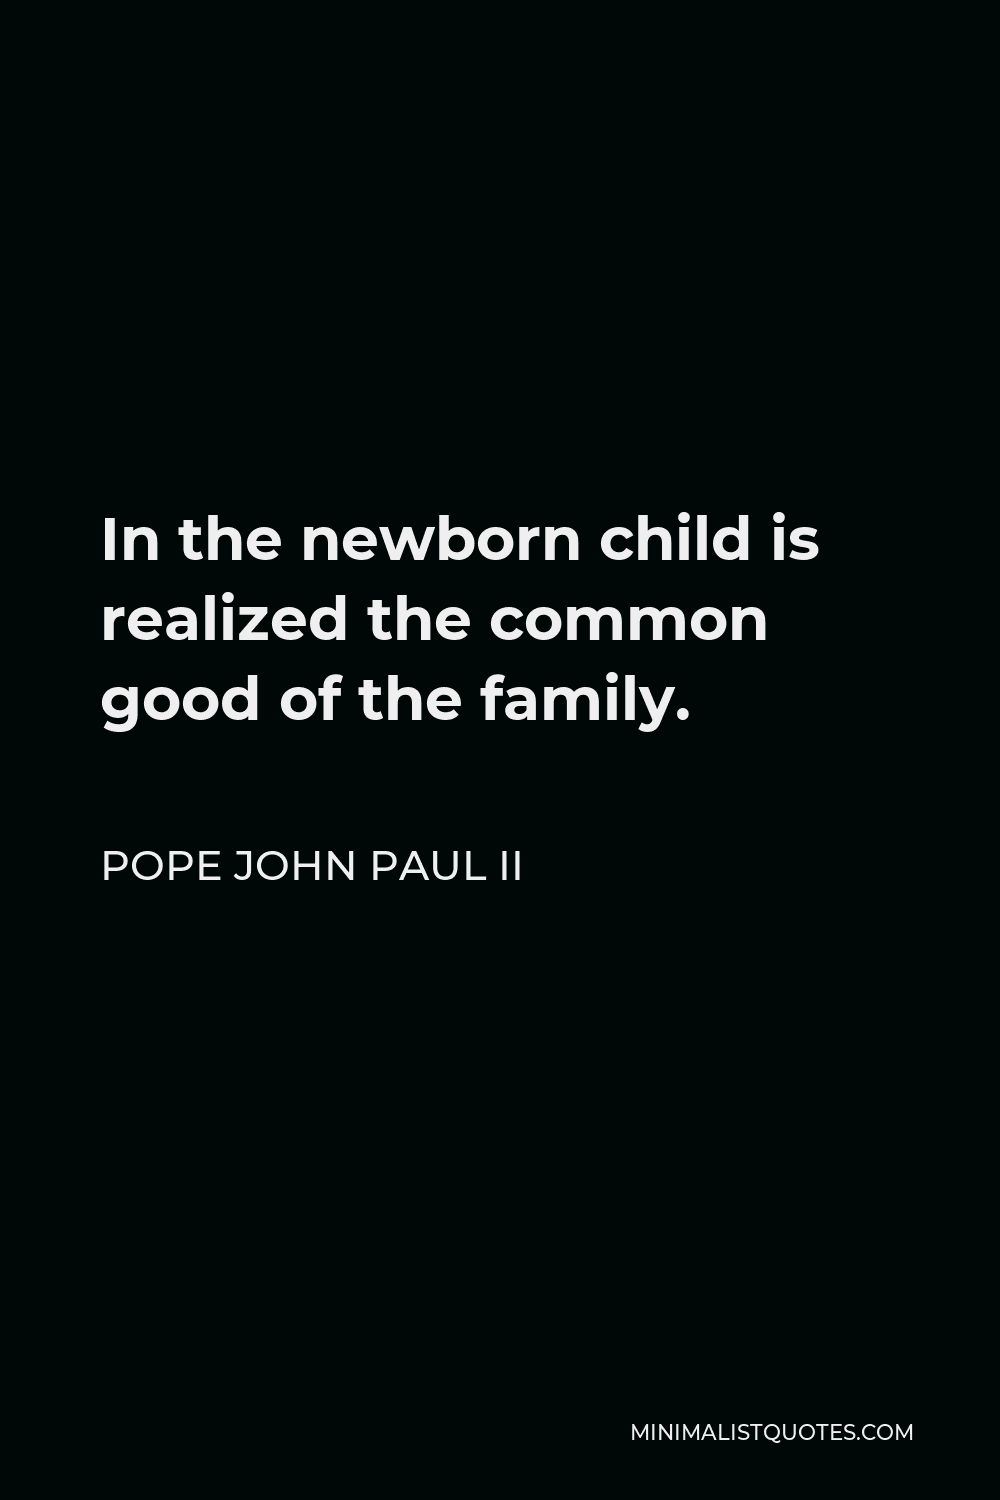 Pope John Paul II Quote - In the newborn child is realized the common good of the family.